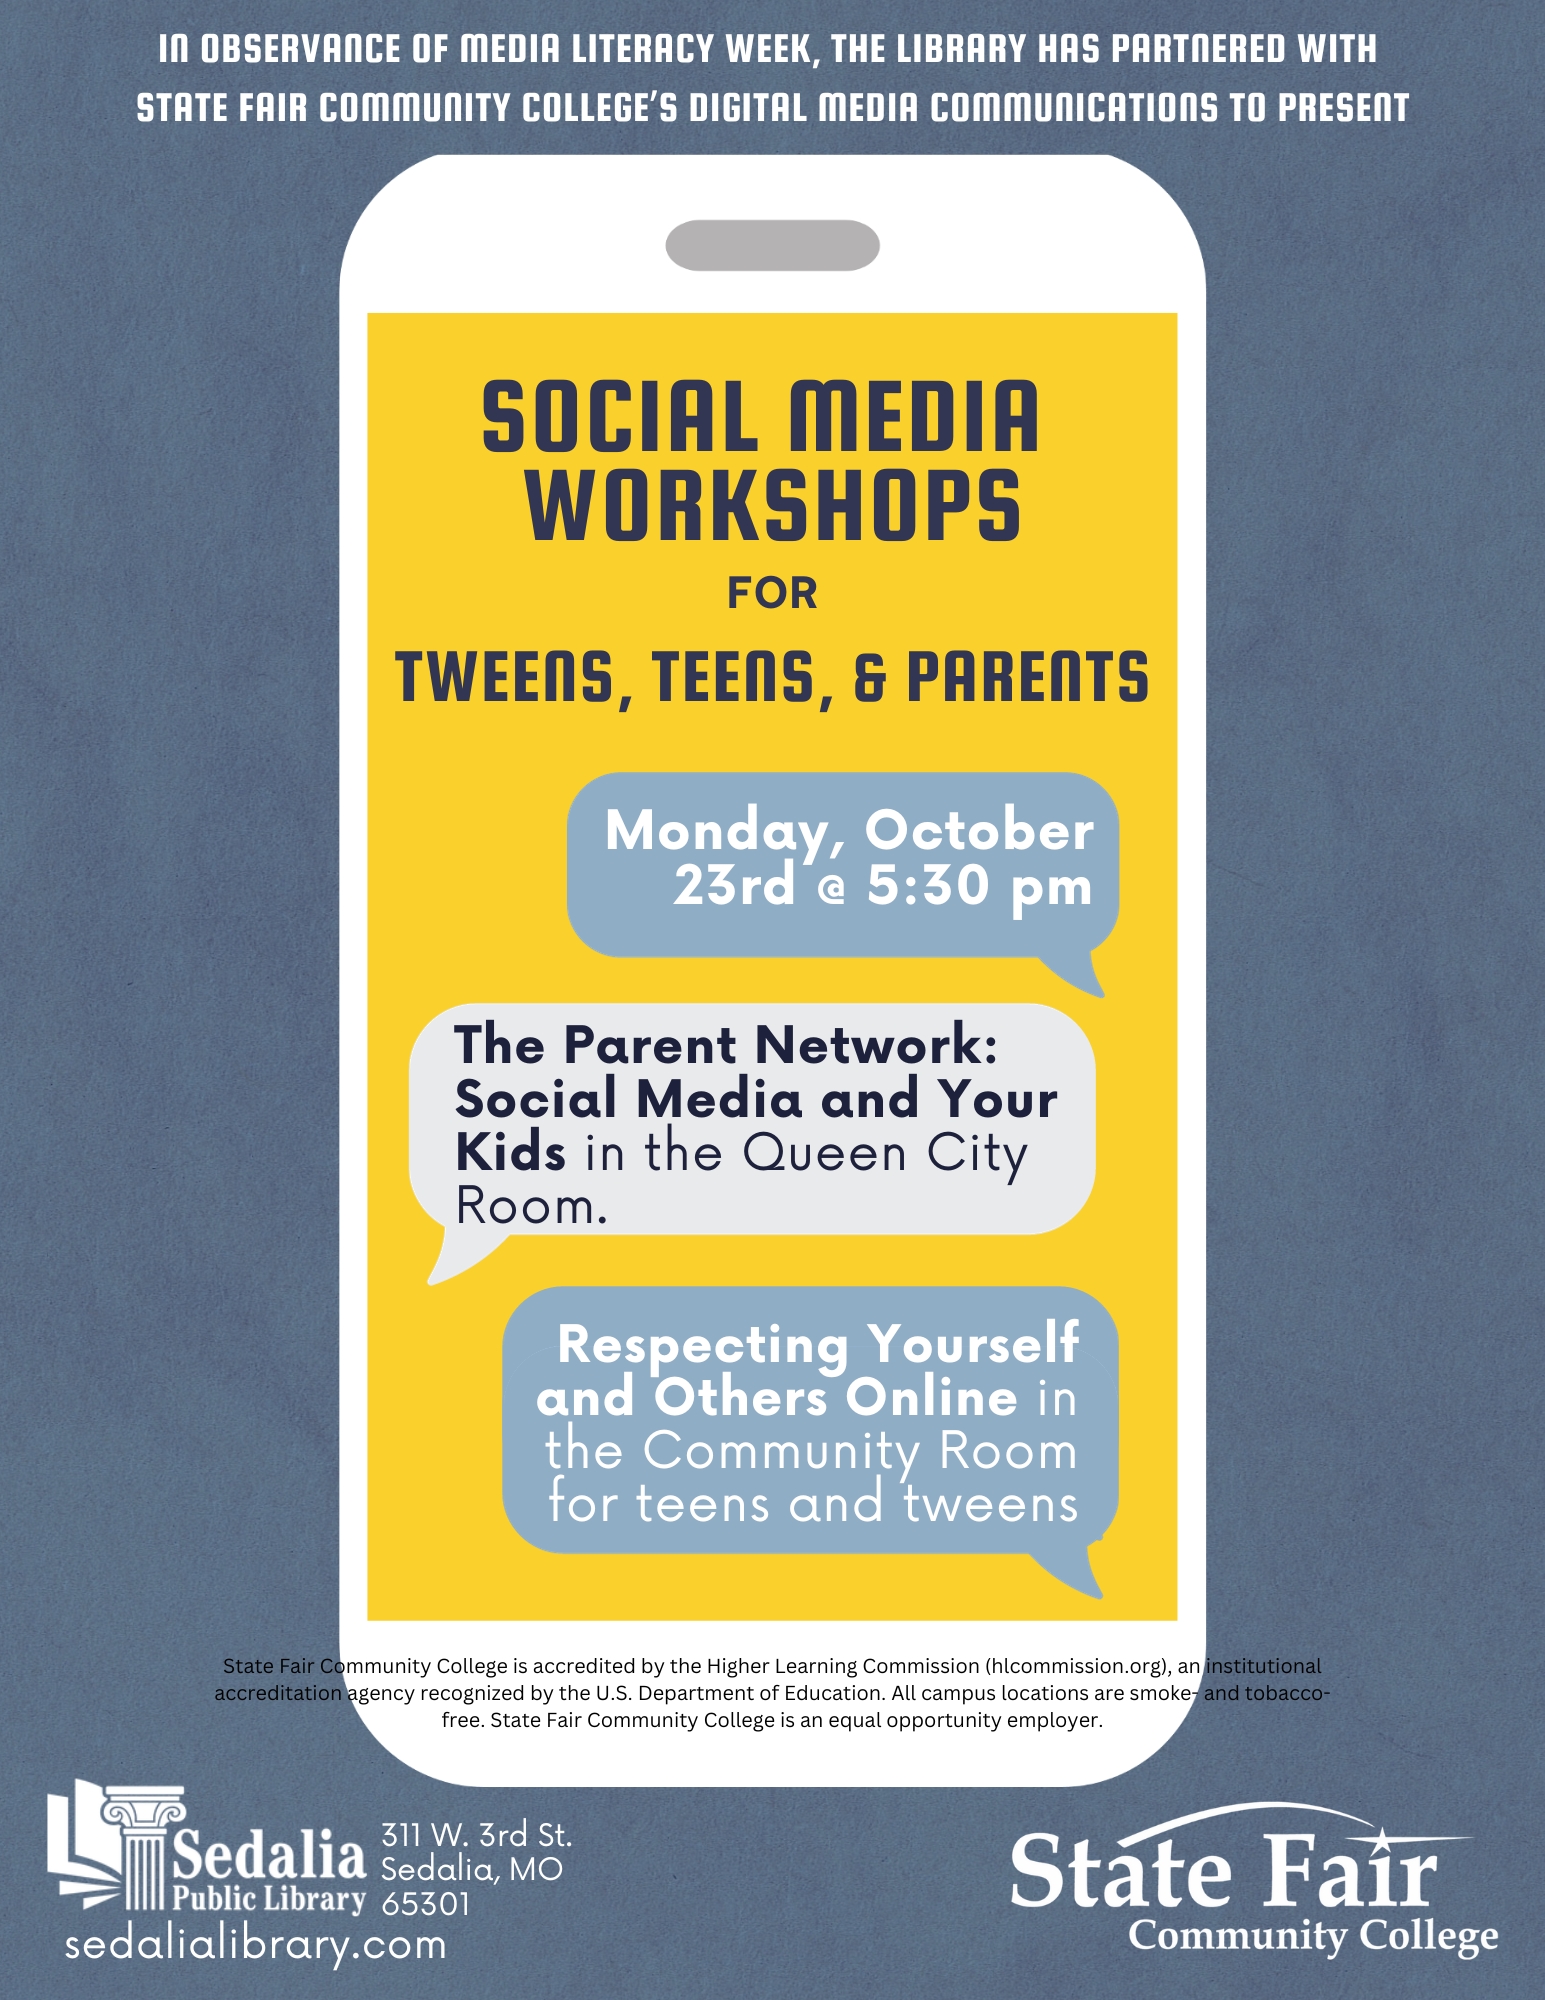 Read more about SFCC’s Digital Media Program Partners with Library for Social Media Workshop